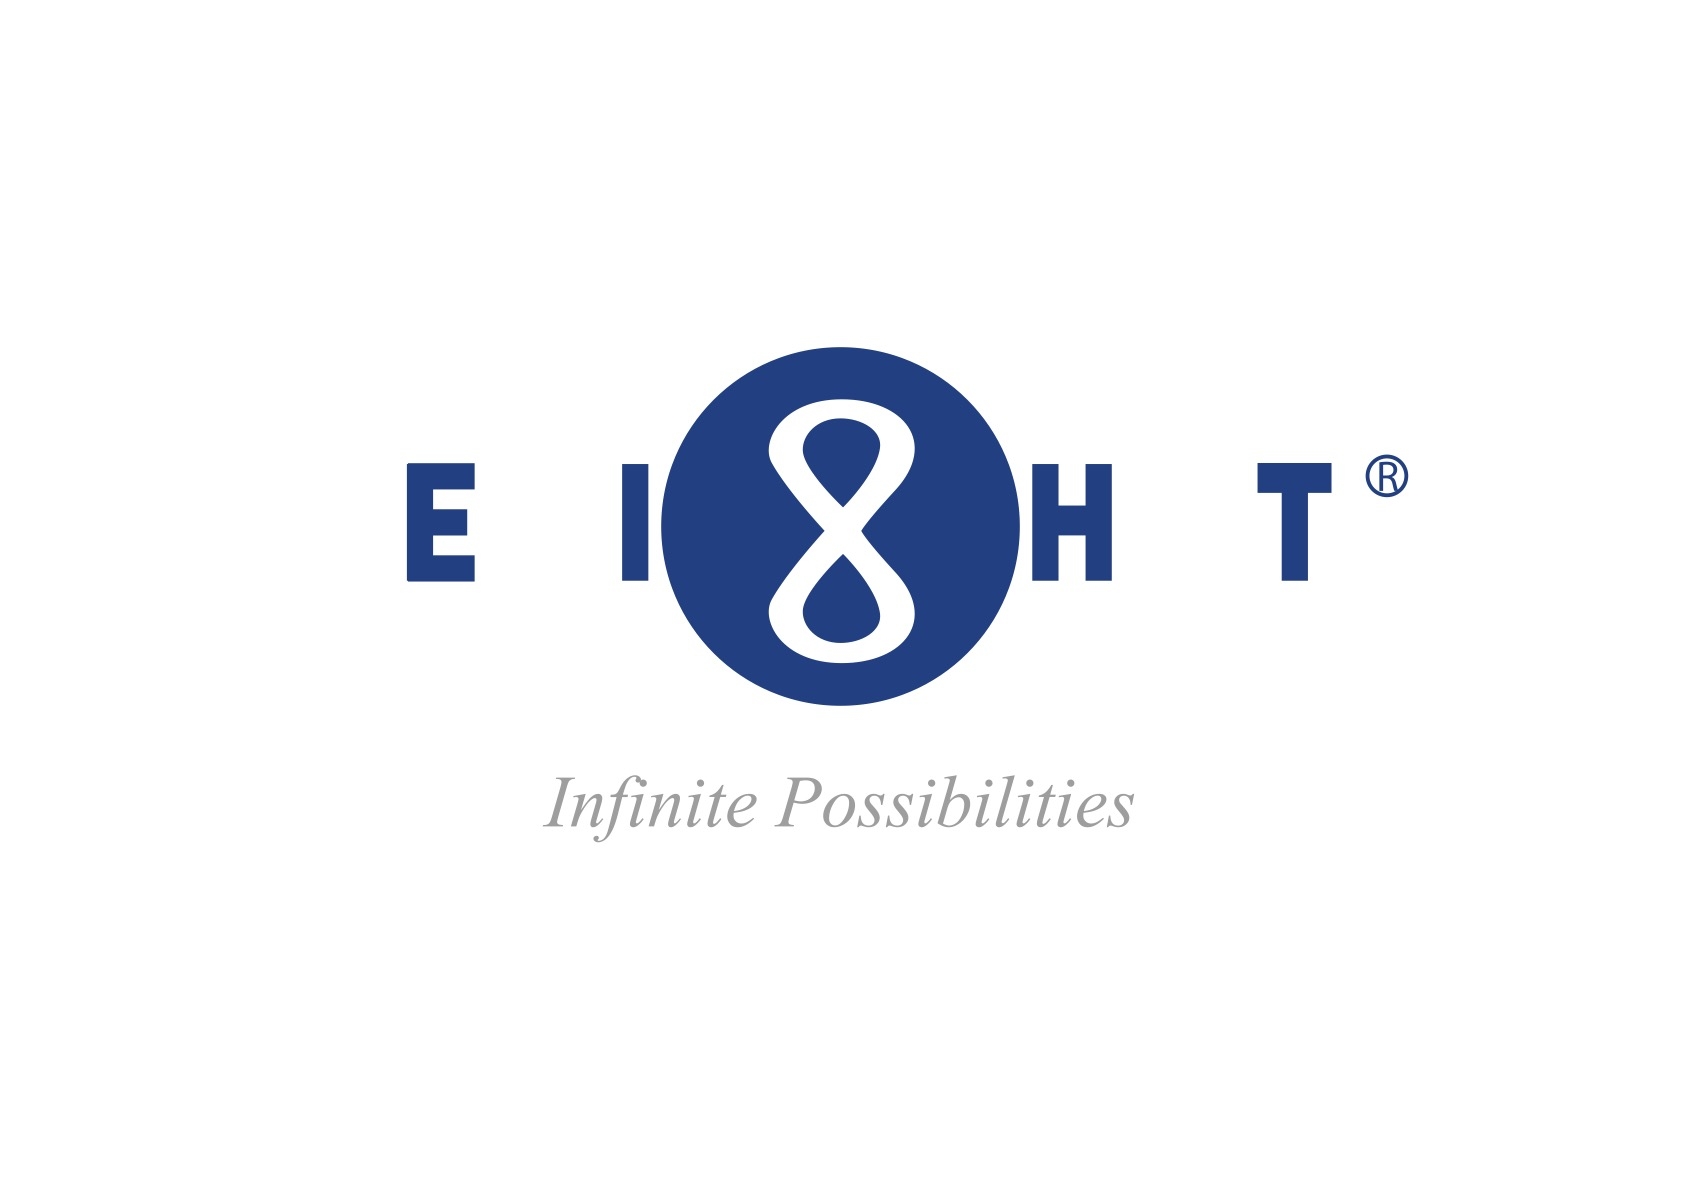 Eight logo with Infinite Possibilities